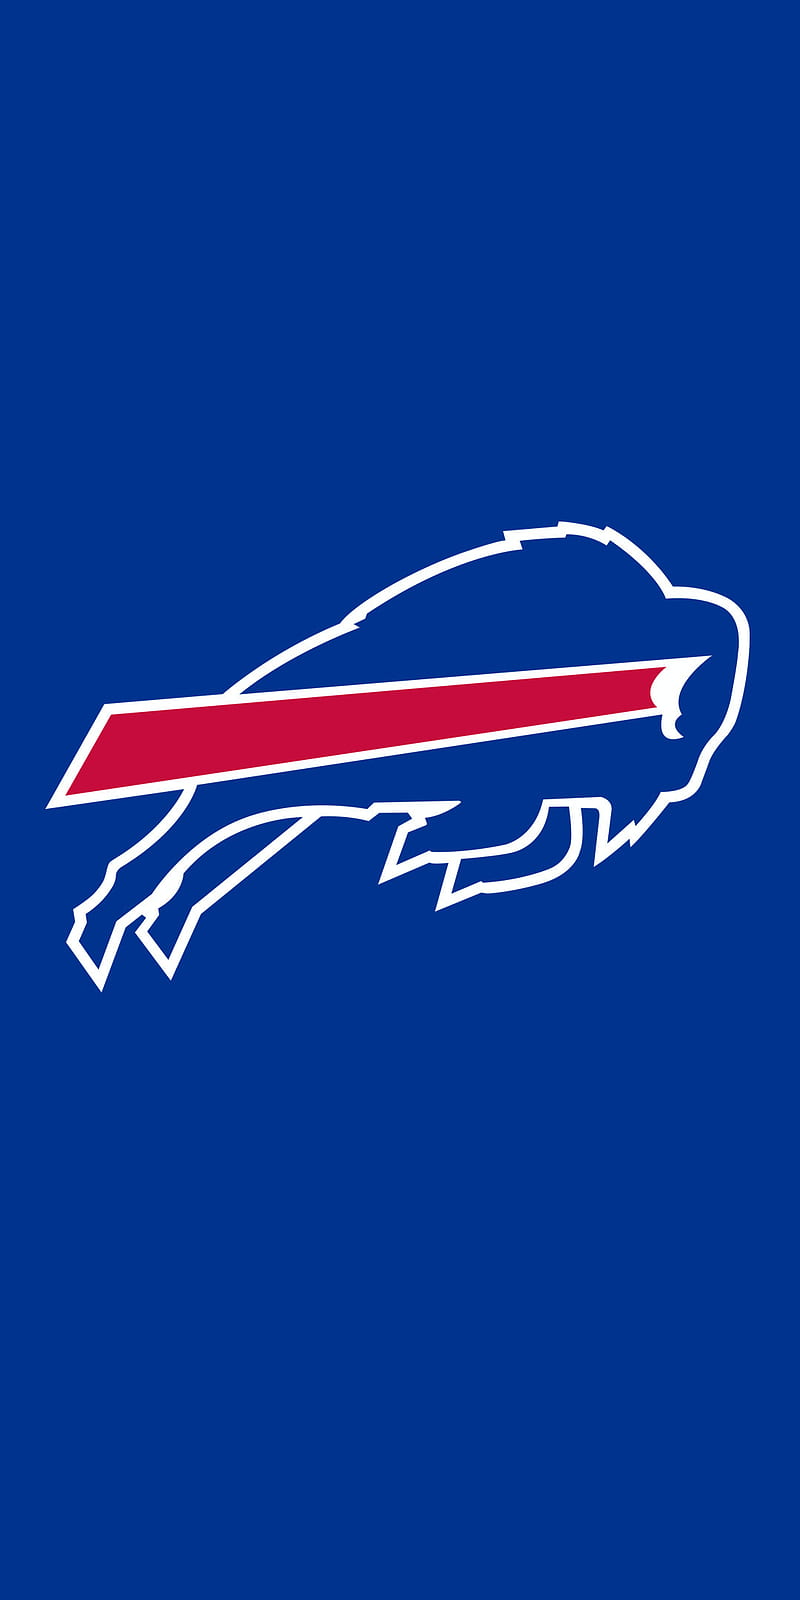 Download Buffalo bills wallpaper by MrDolphin00  f1  Free on ZEDGE now  Browse millions of popular a  Nfl buffalo bills Buffalo bills football  Bills football